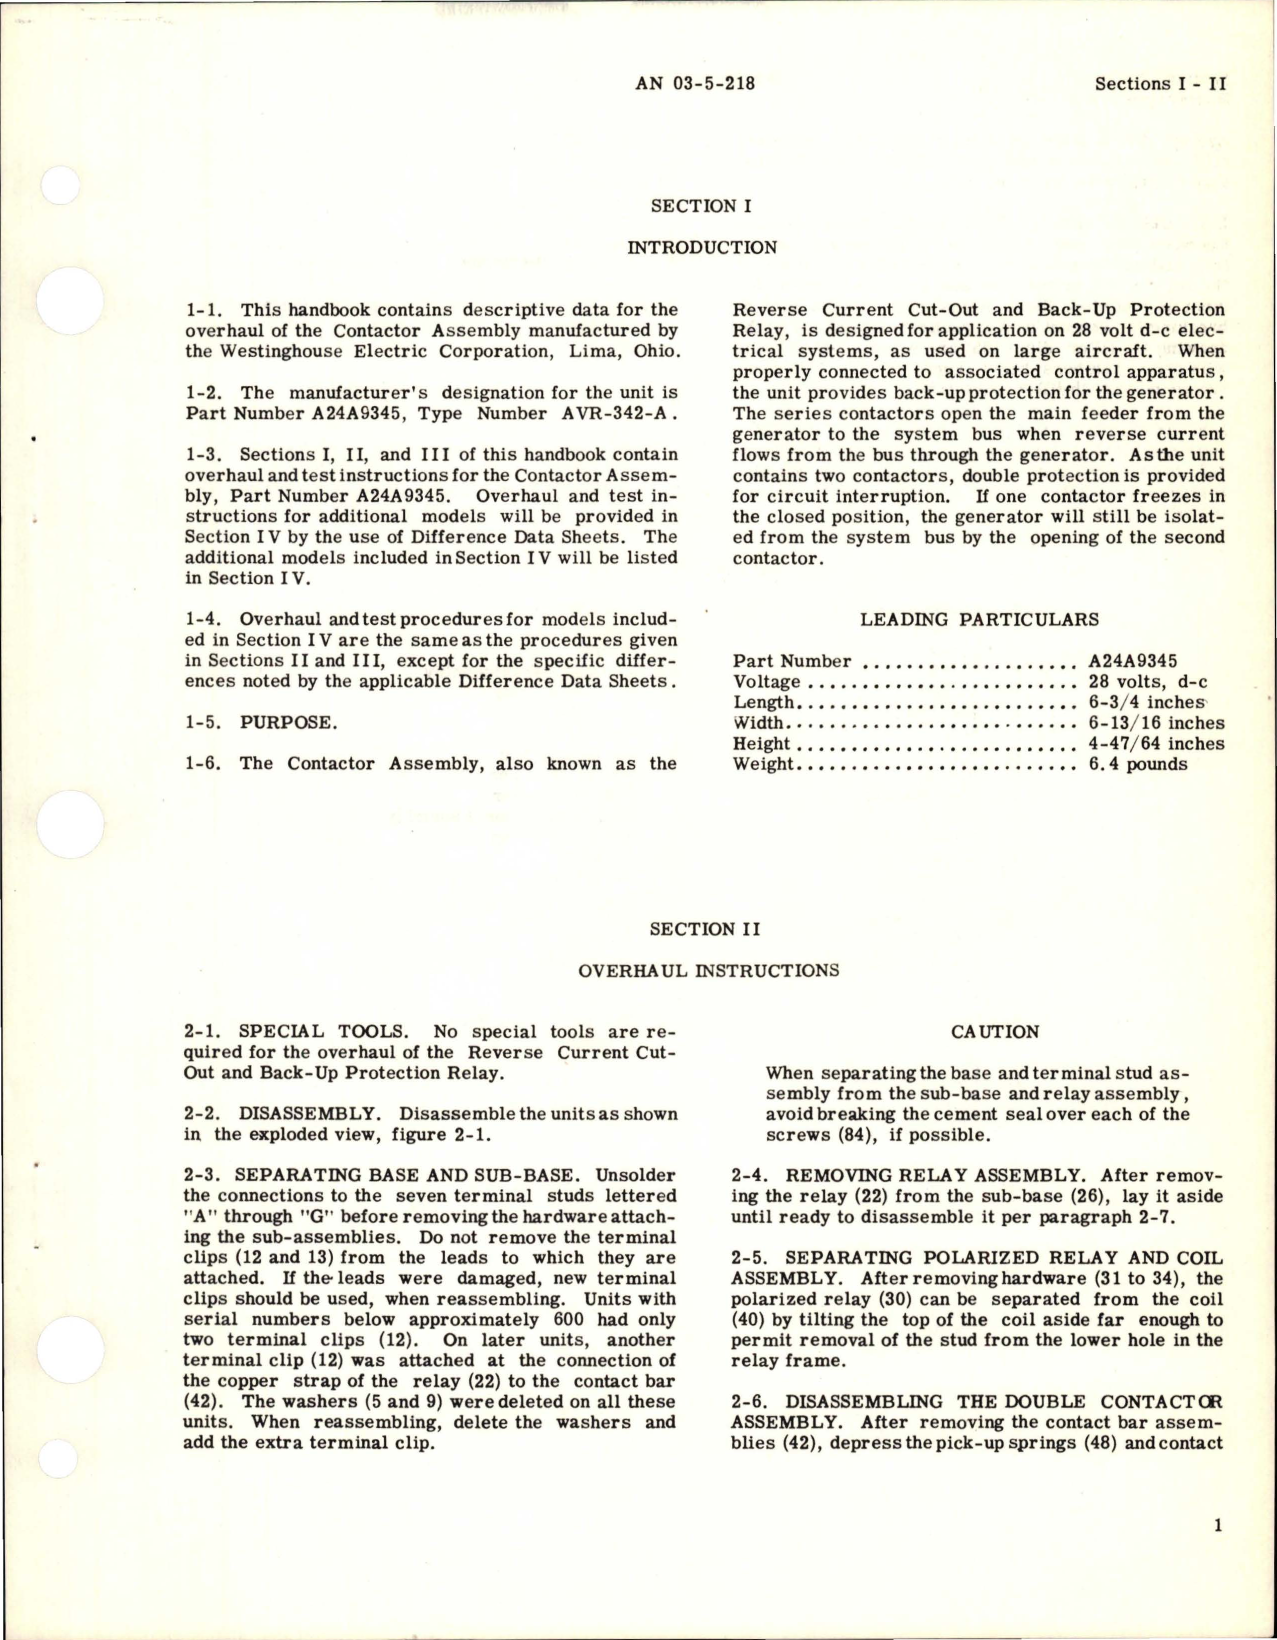 Sample page 5 from AirCorps Library document: Overhaul Instructions for Contractor Assembly - Model A24A9345 - Type AVR-342-A